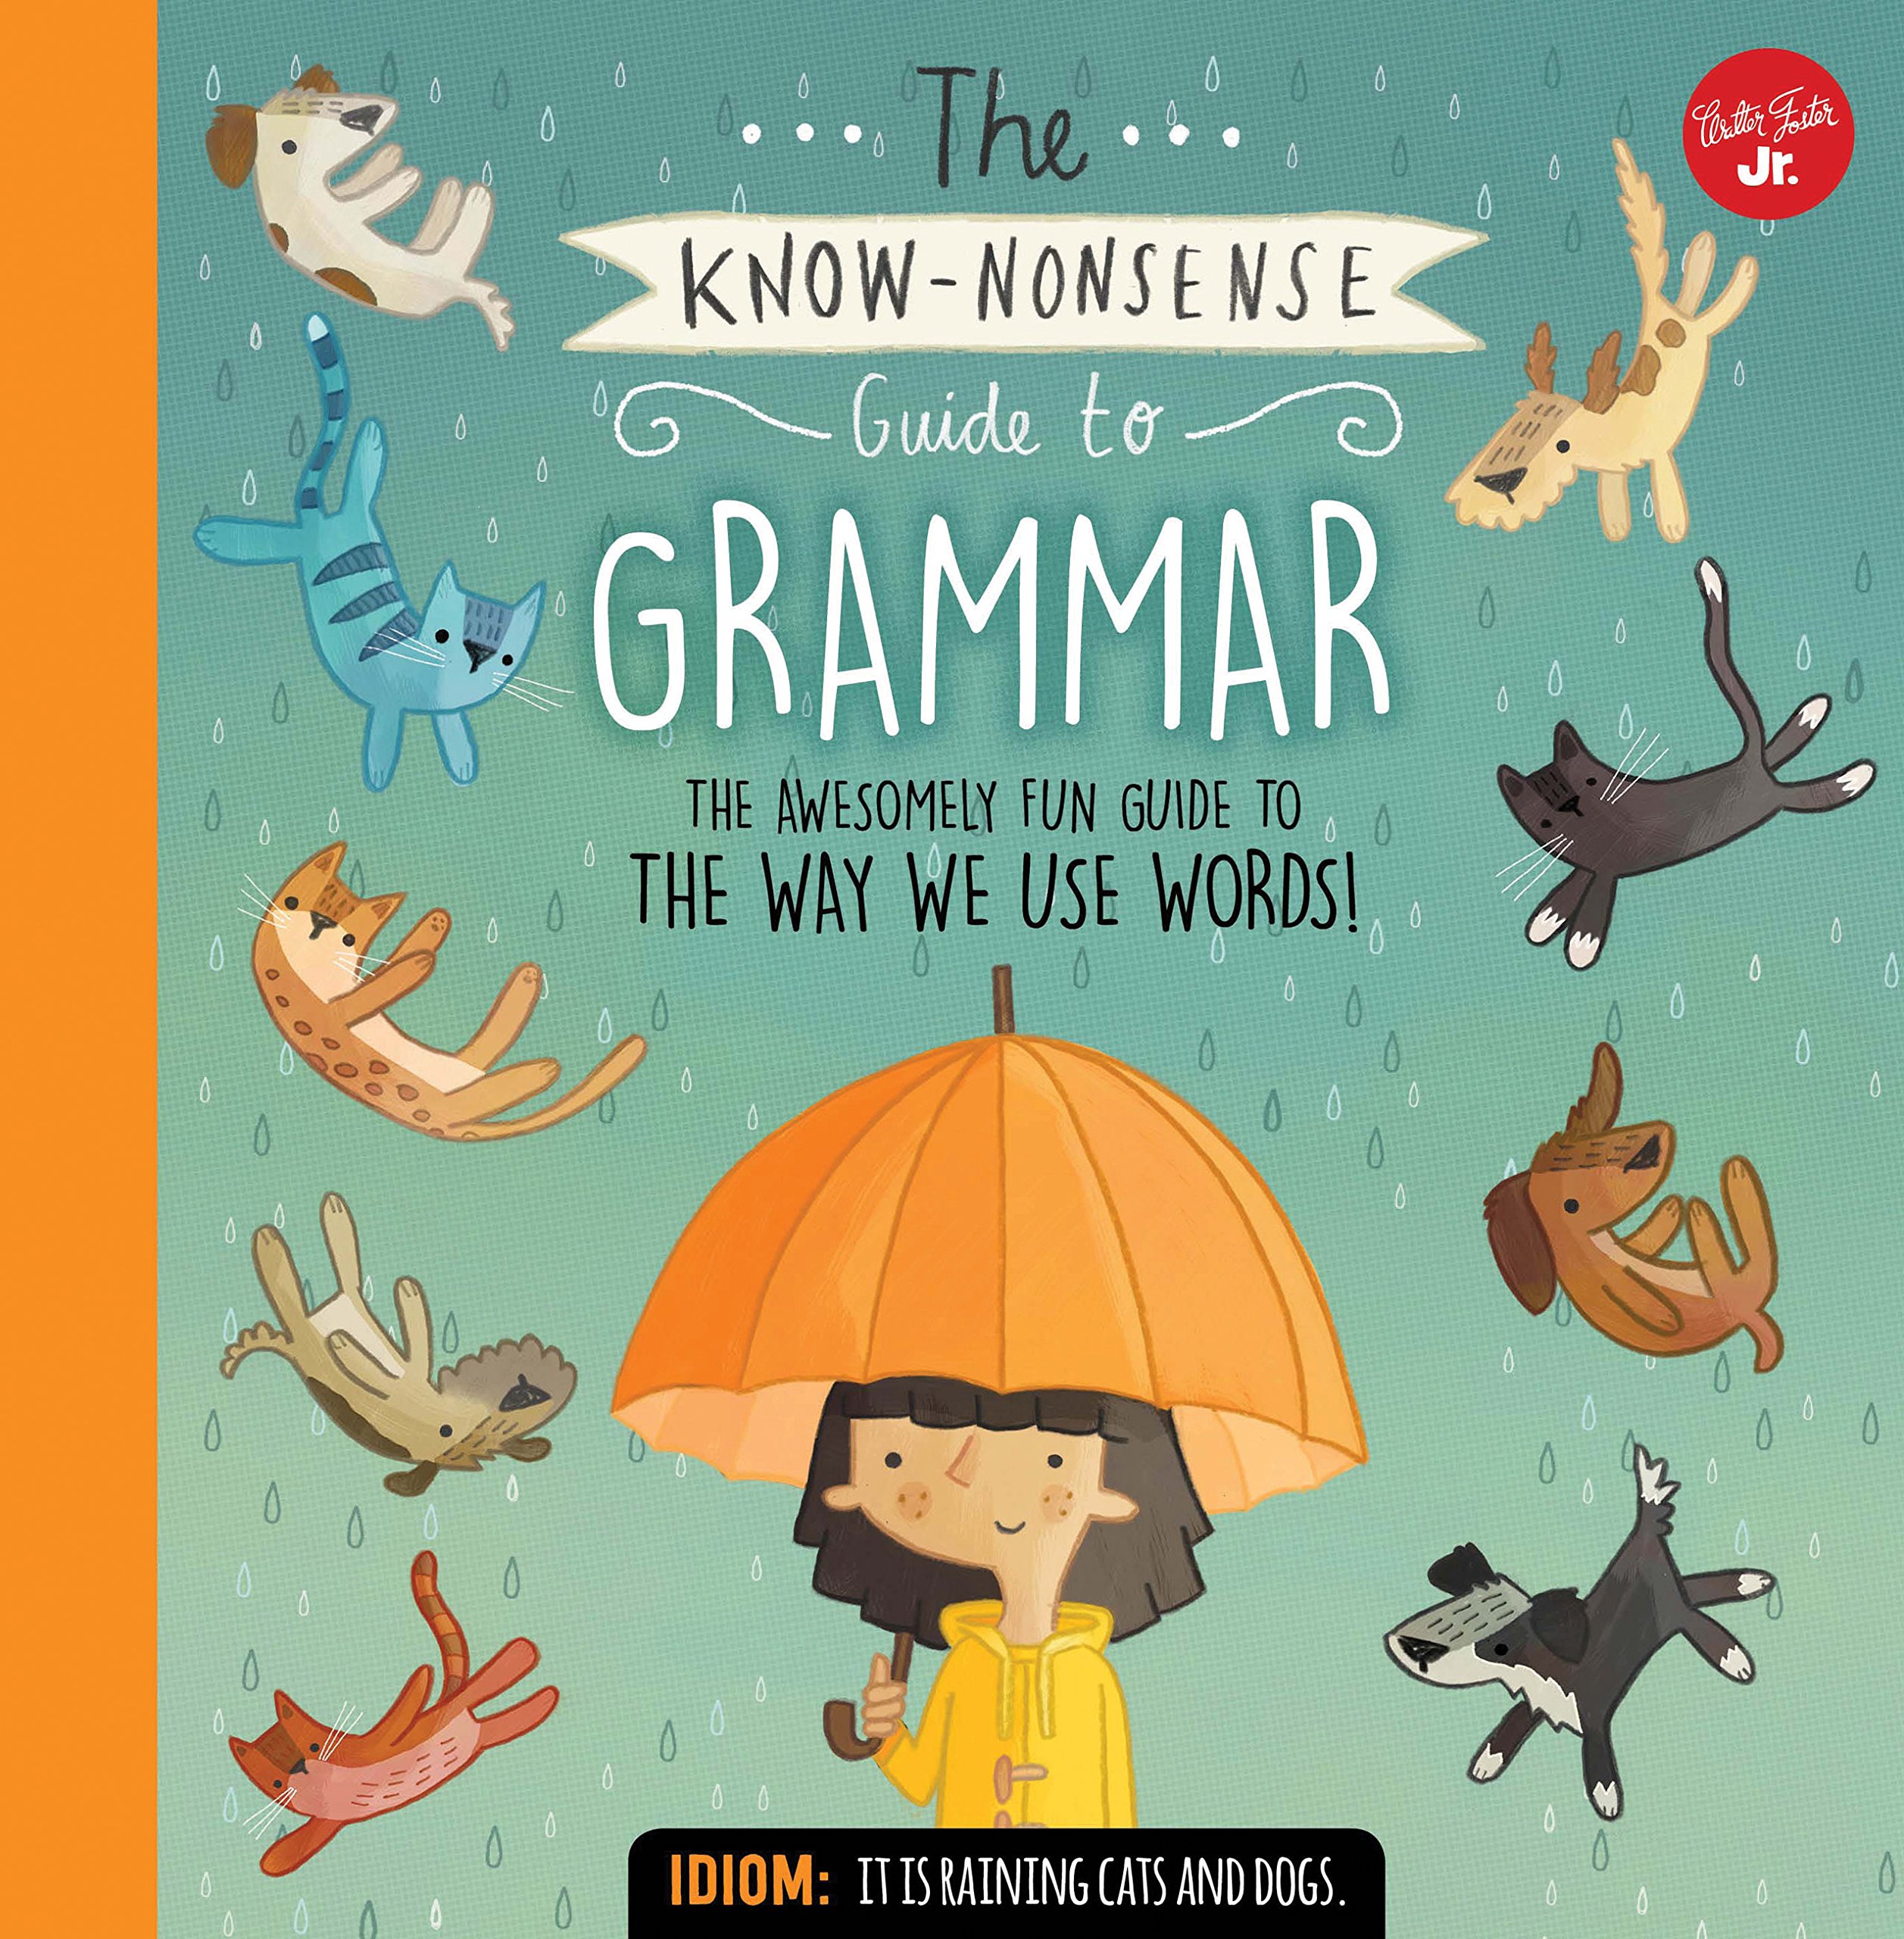 The Know-nonsense Guide to Grammar book cover